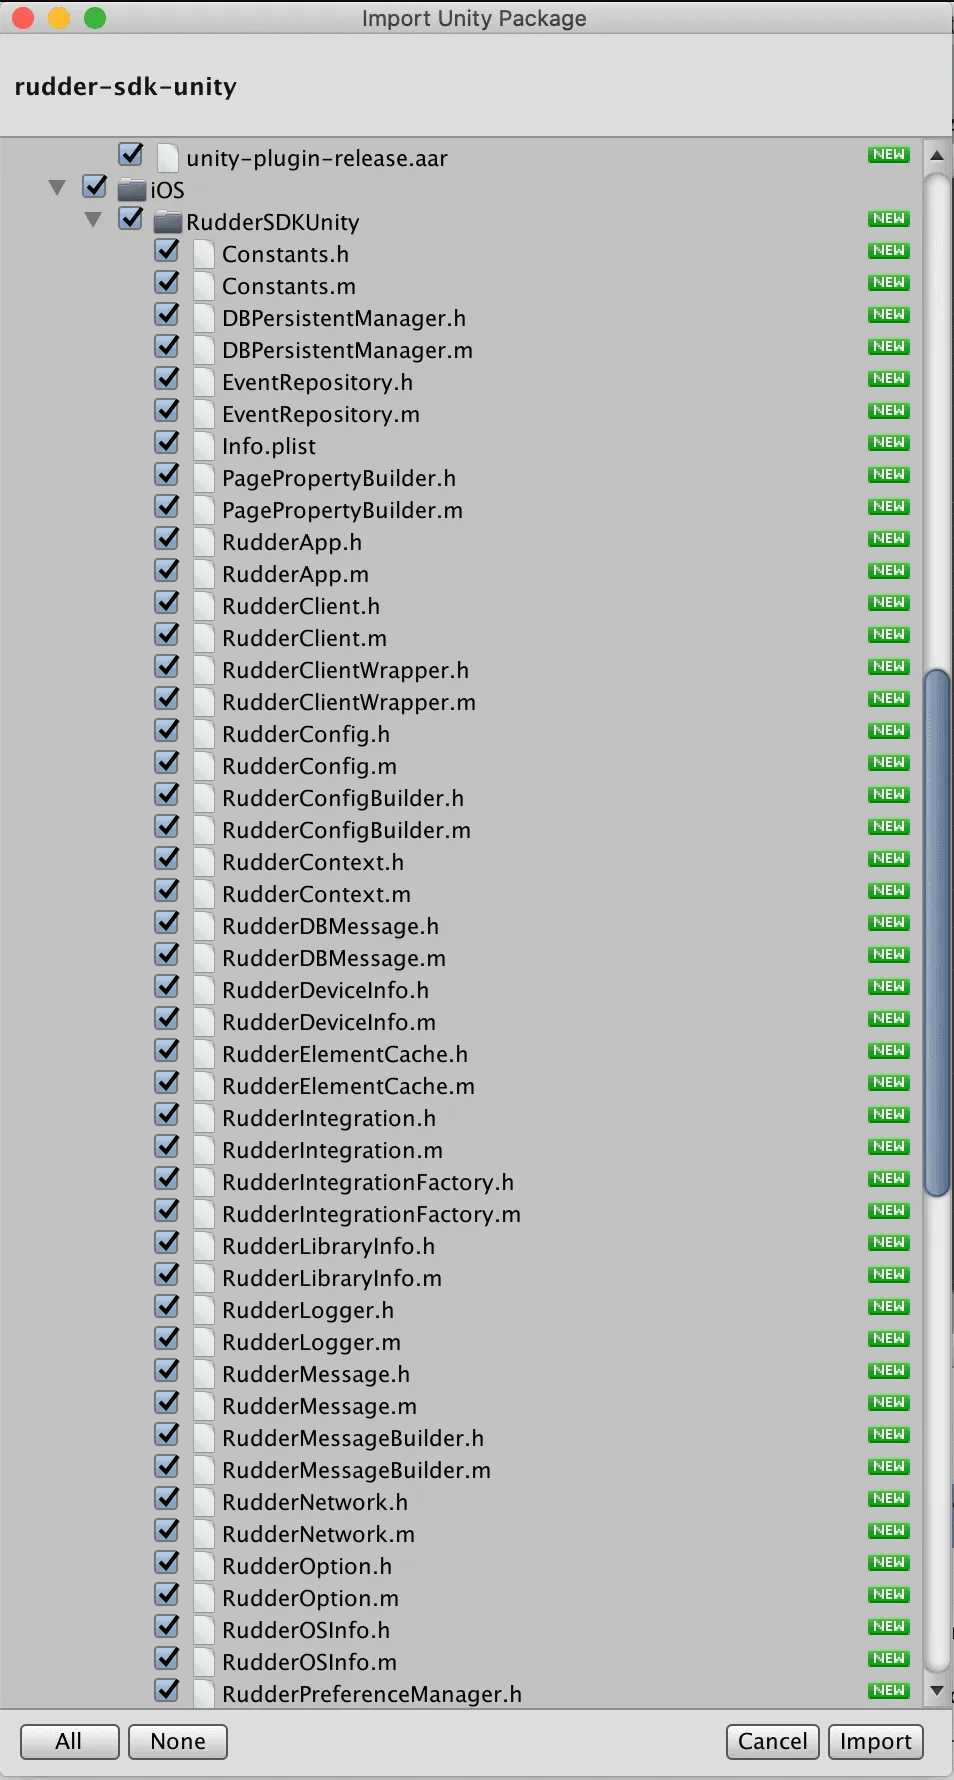 Importing the Unity package